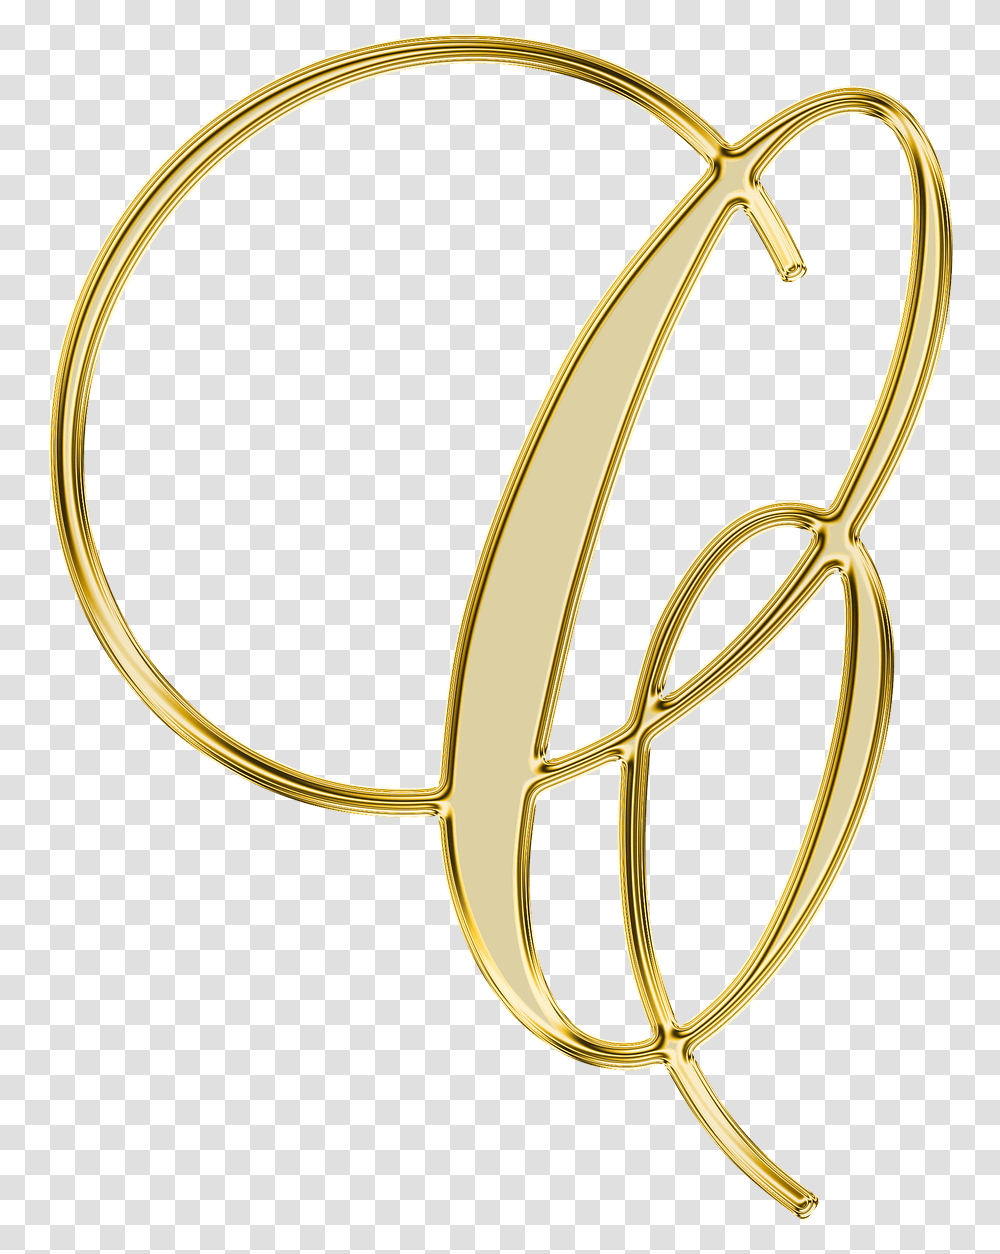 C Letter Images Gold Letter C, Accessories, Accessory, Jewelry, Sunglasses Transparent Png